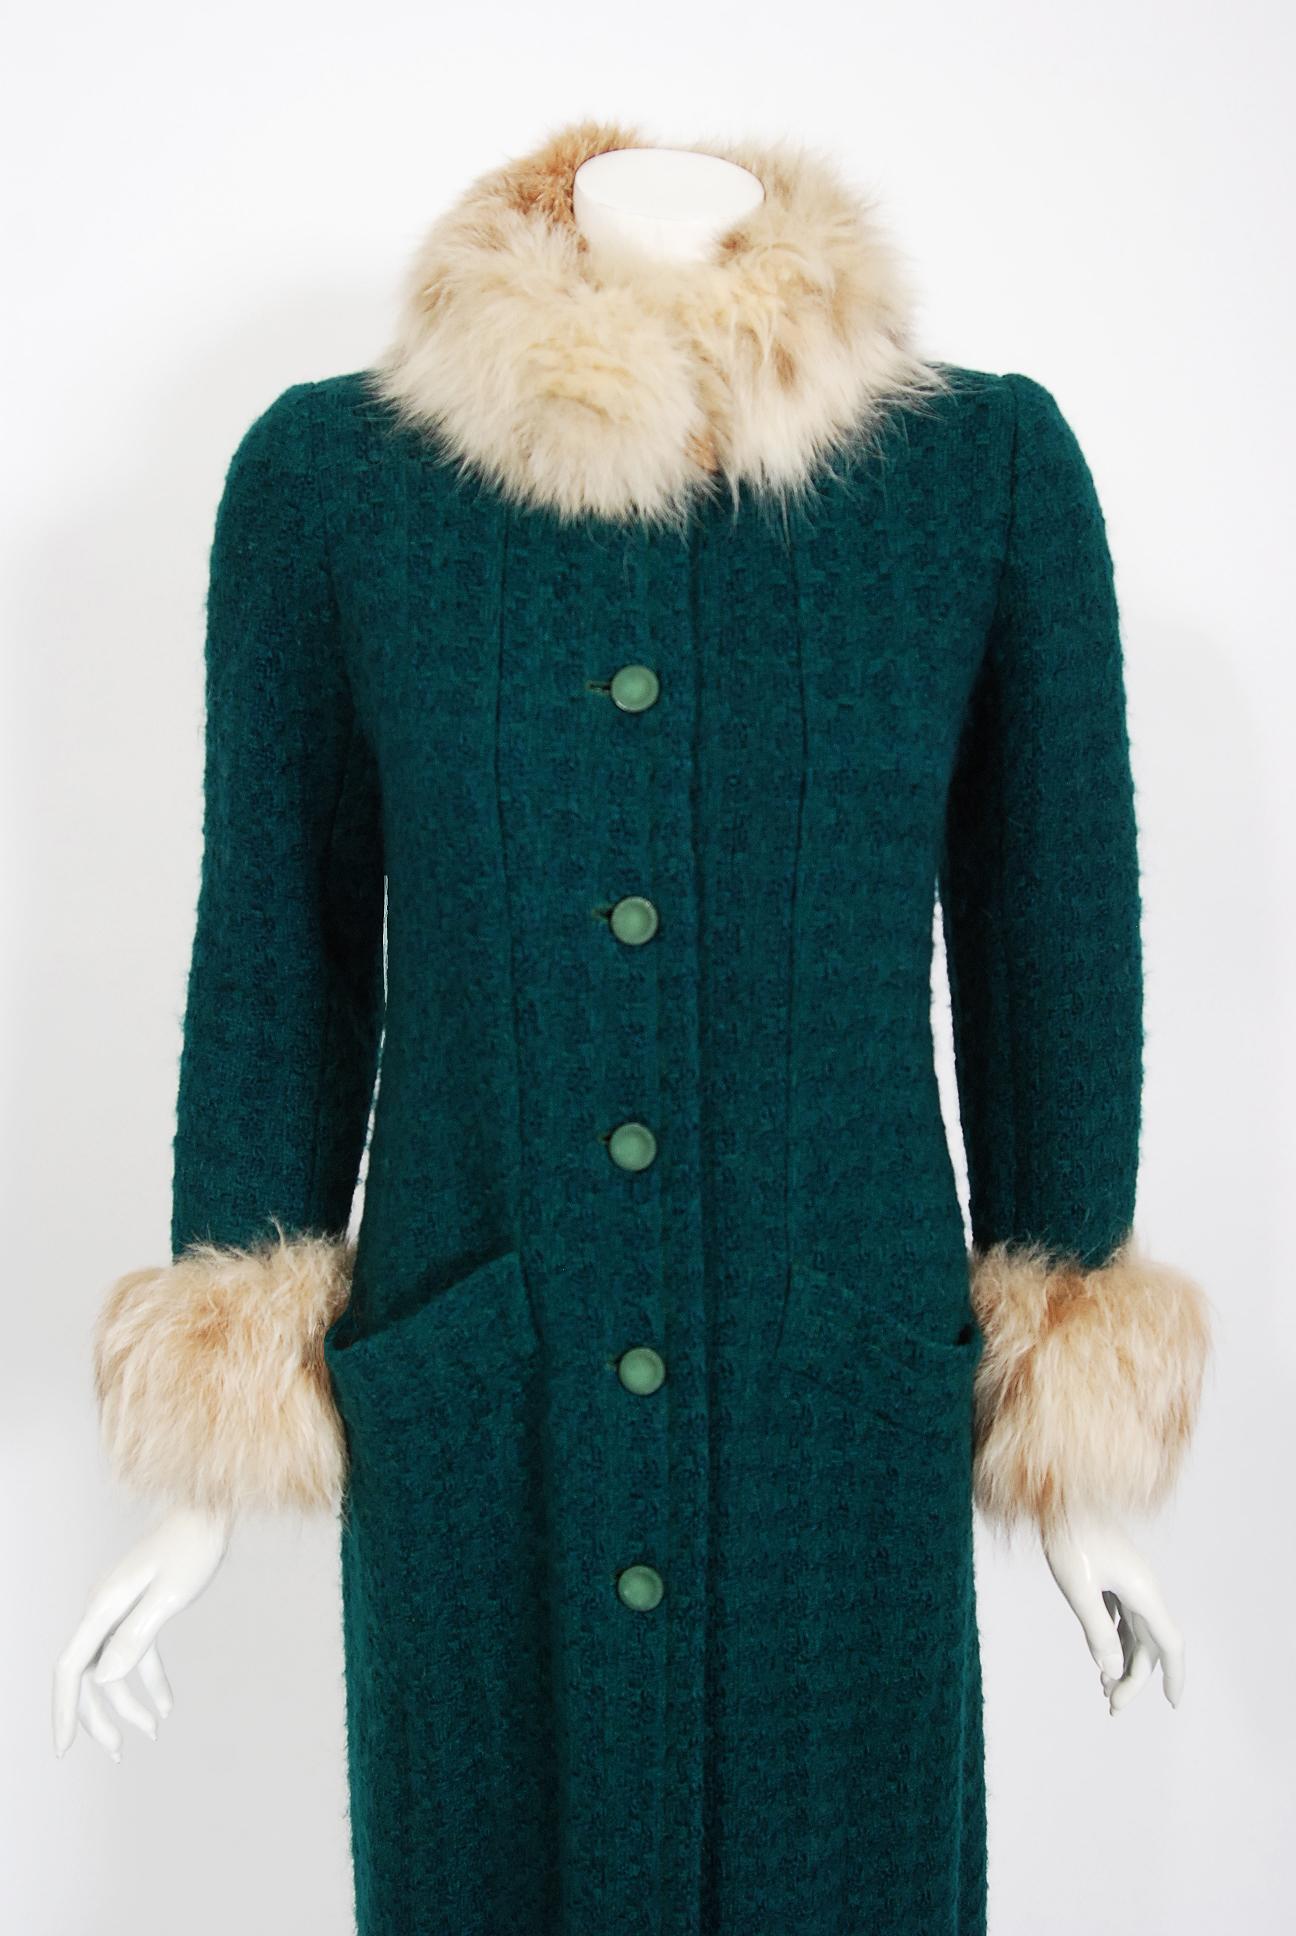 Chanel is known to be one of the most luxurious and decadent fashion houses in the world. This breathtaking forest green boucle wool coat from their 1974 haute couture fall-winter collection is a perfect example of why this couture brand has stood